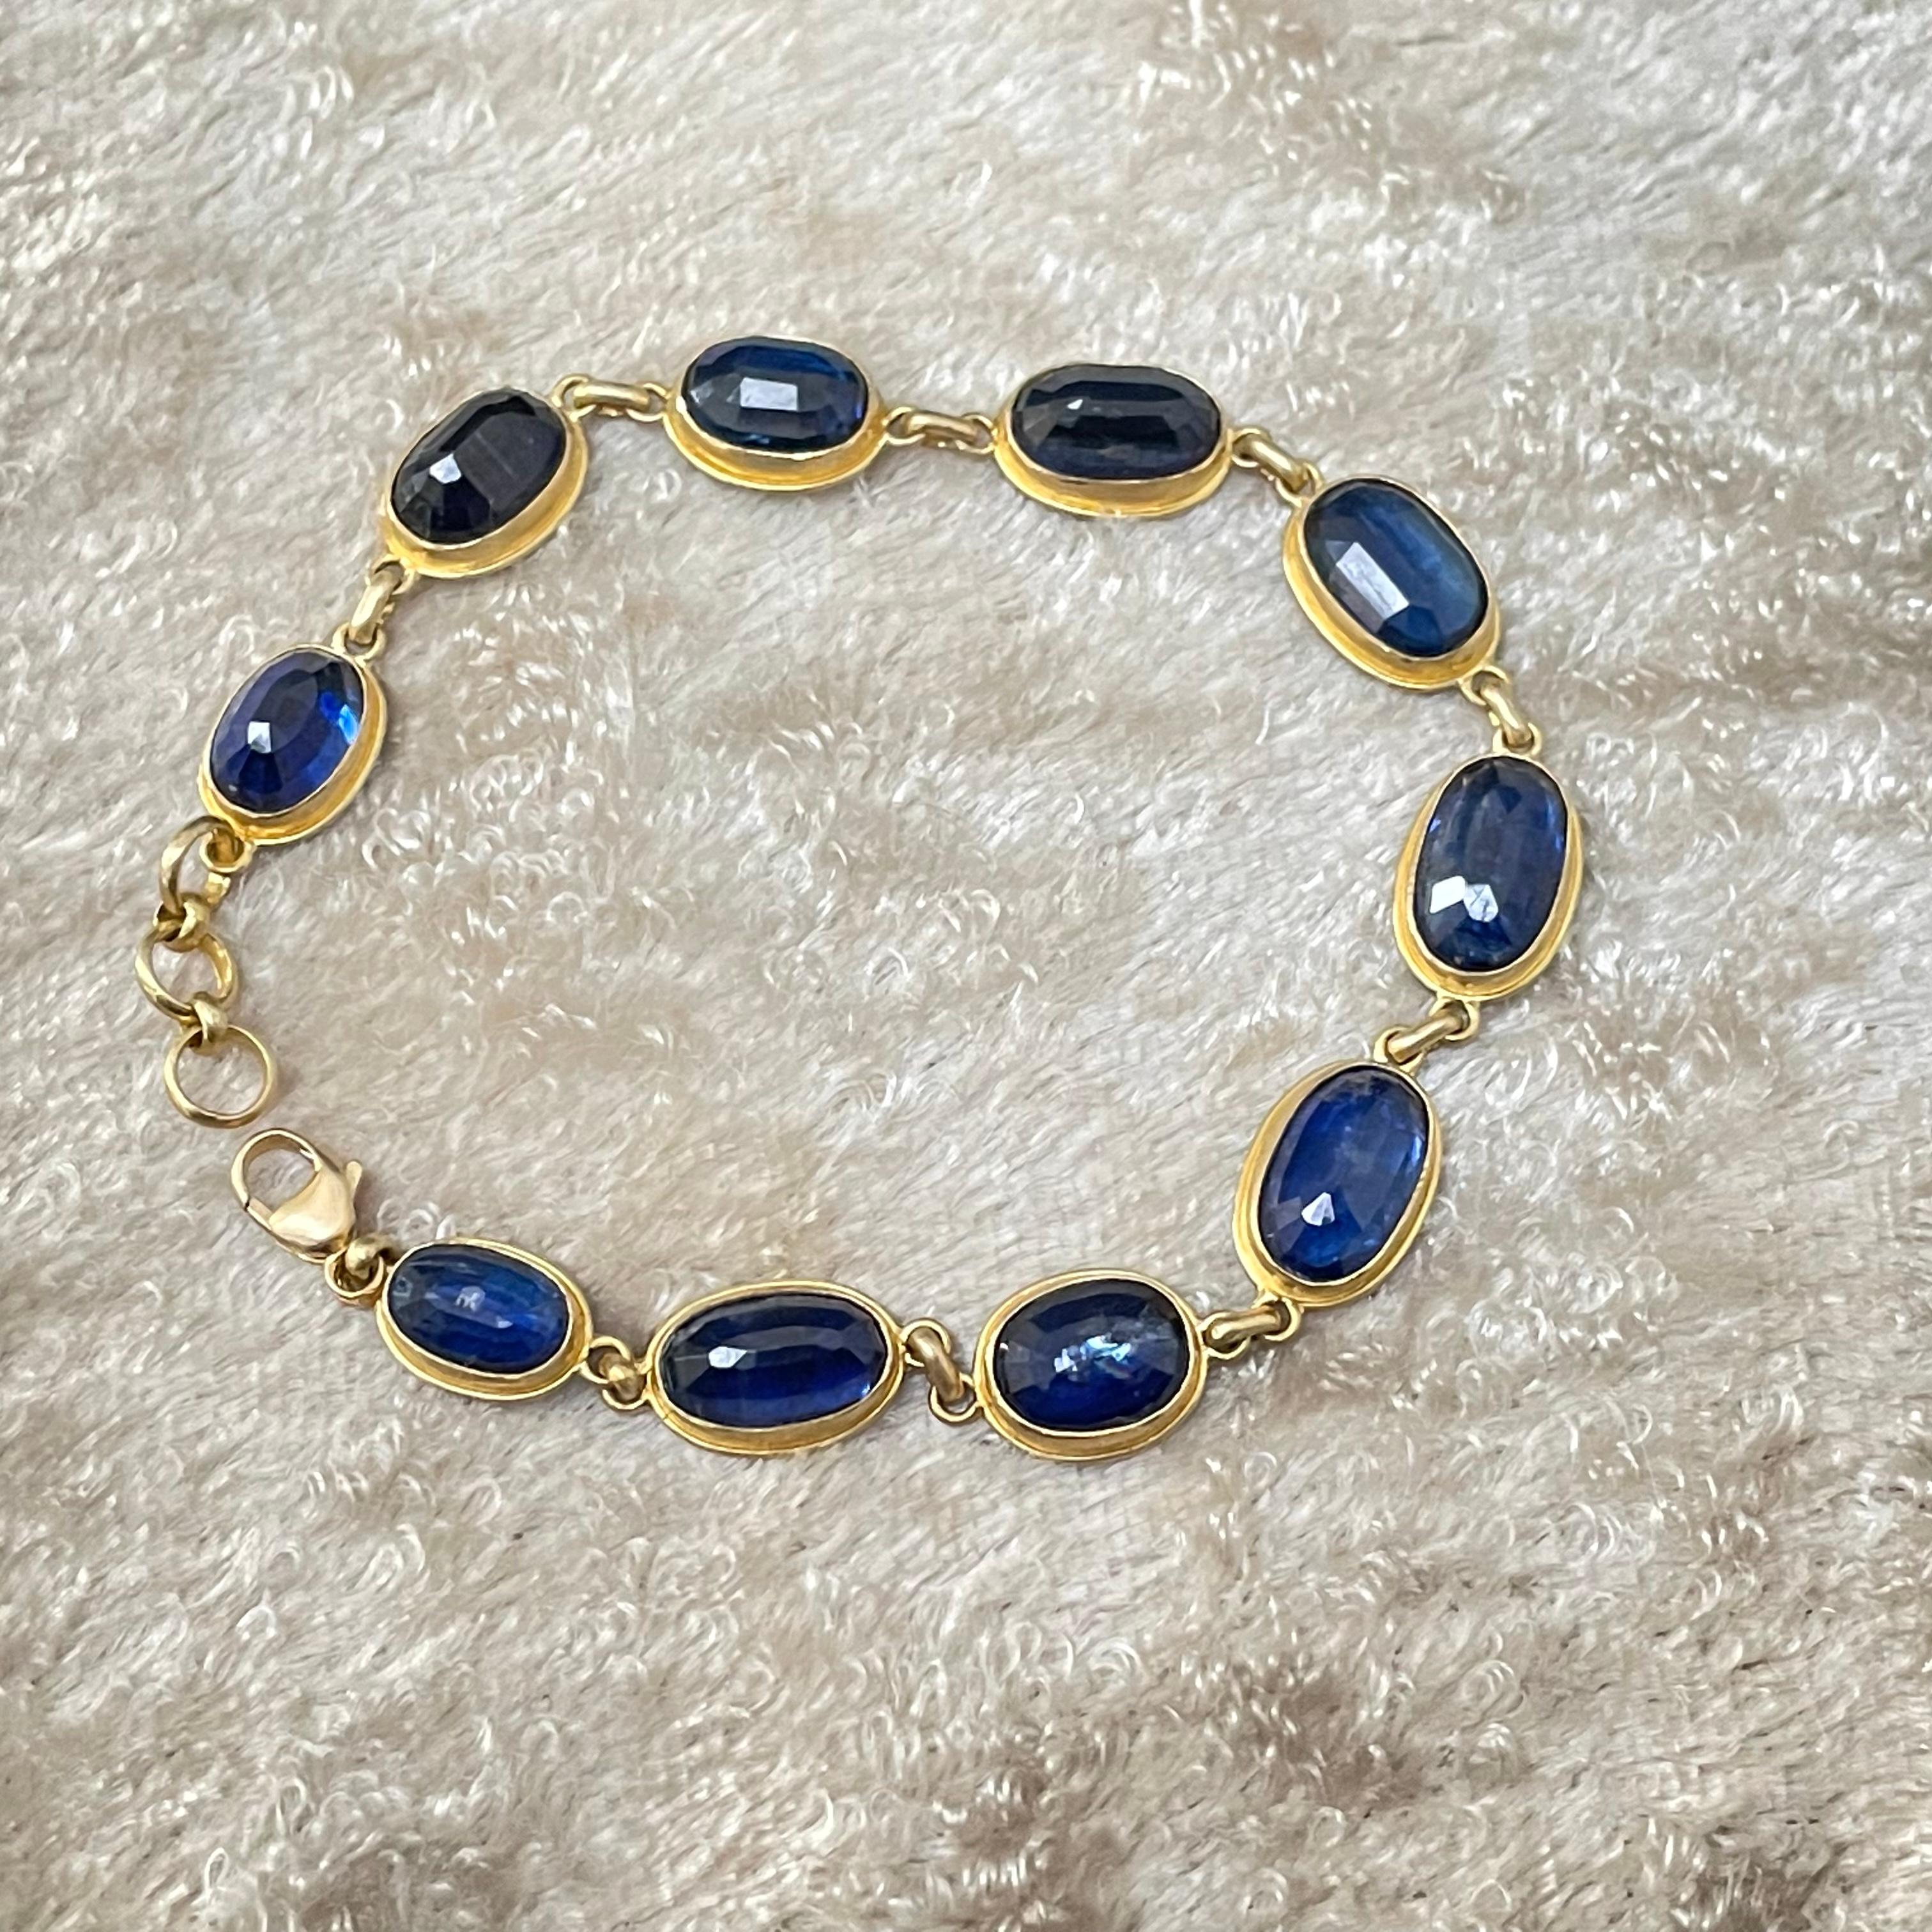 Ten brilliant blue rose cut kyanites from 7 x 9 mm to 8 x 12 mm in size are set in simple matte-finish 18 bezels with surrounding double bezels in this 
lively juxtaposition of blue and gold.  Slightly adjustable at 7 inches, this currently fits